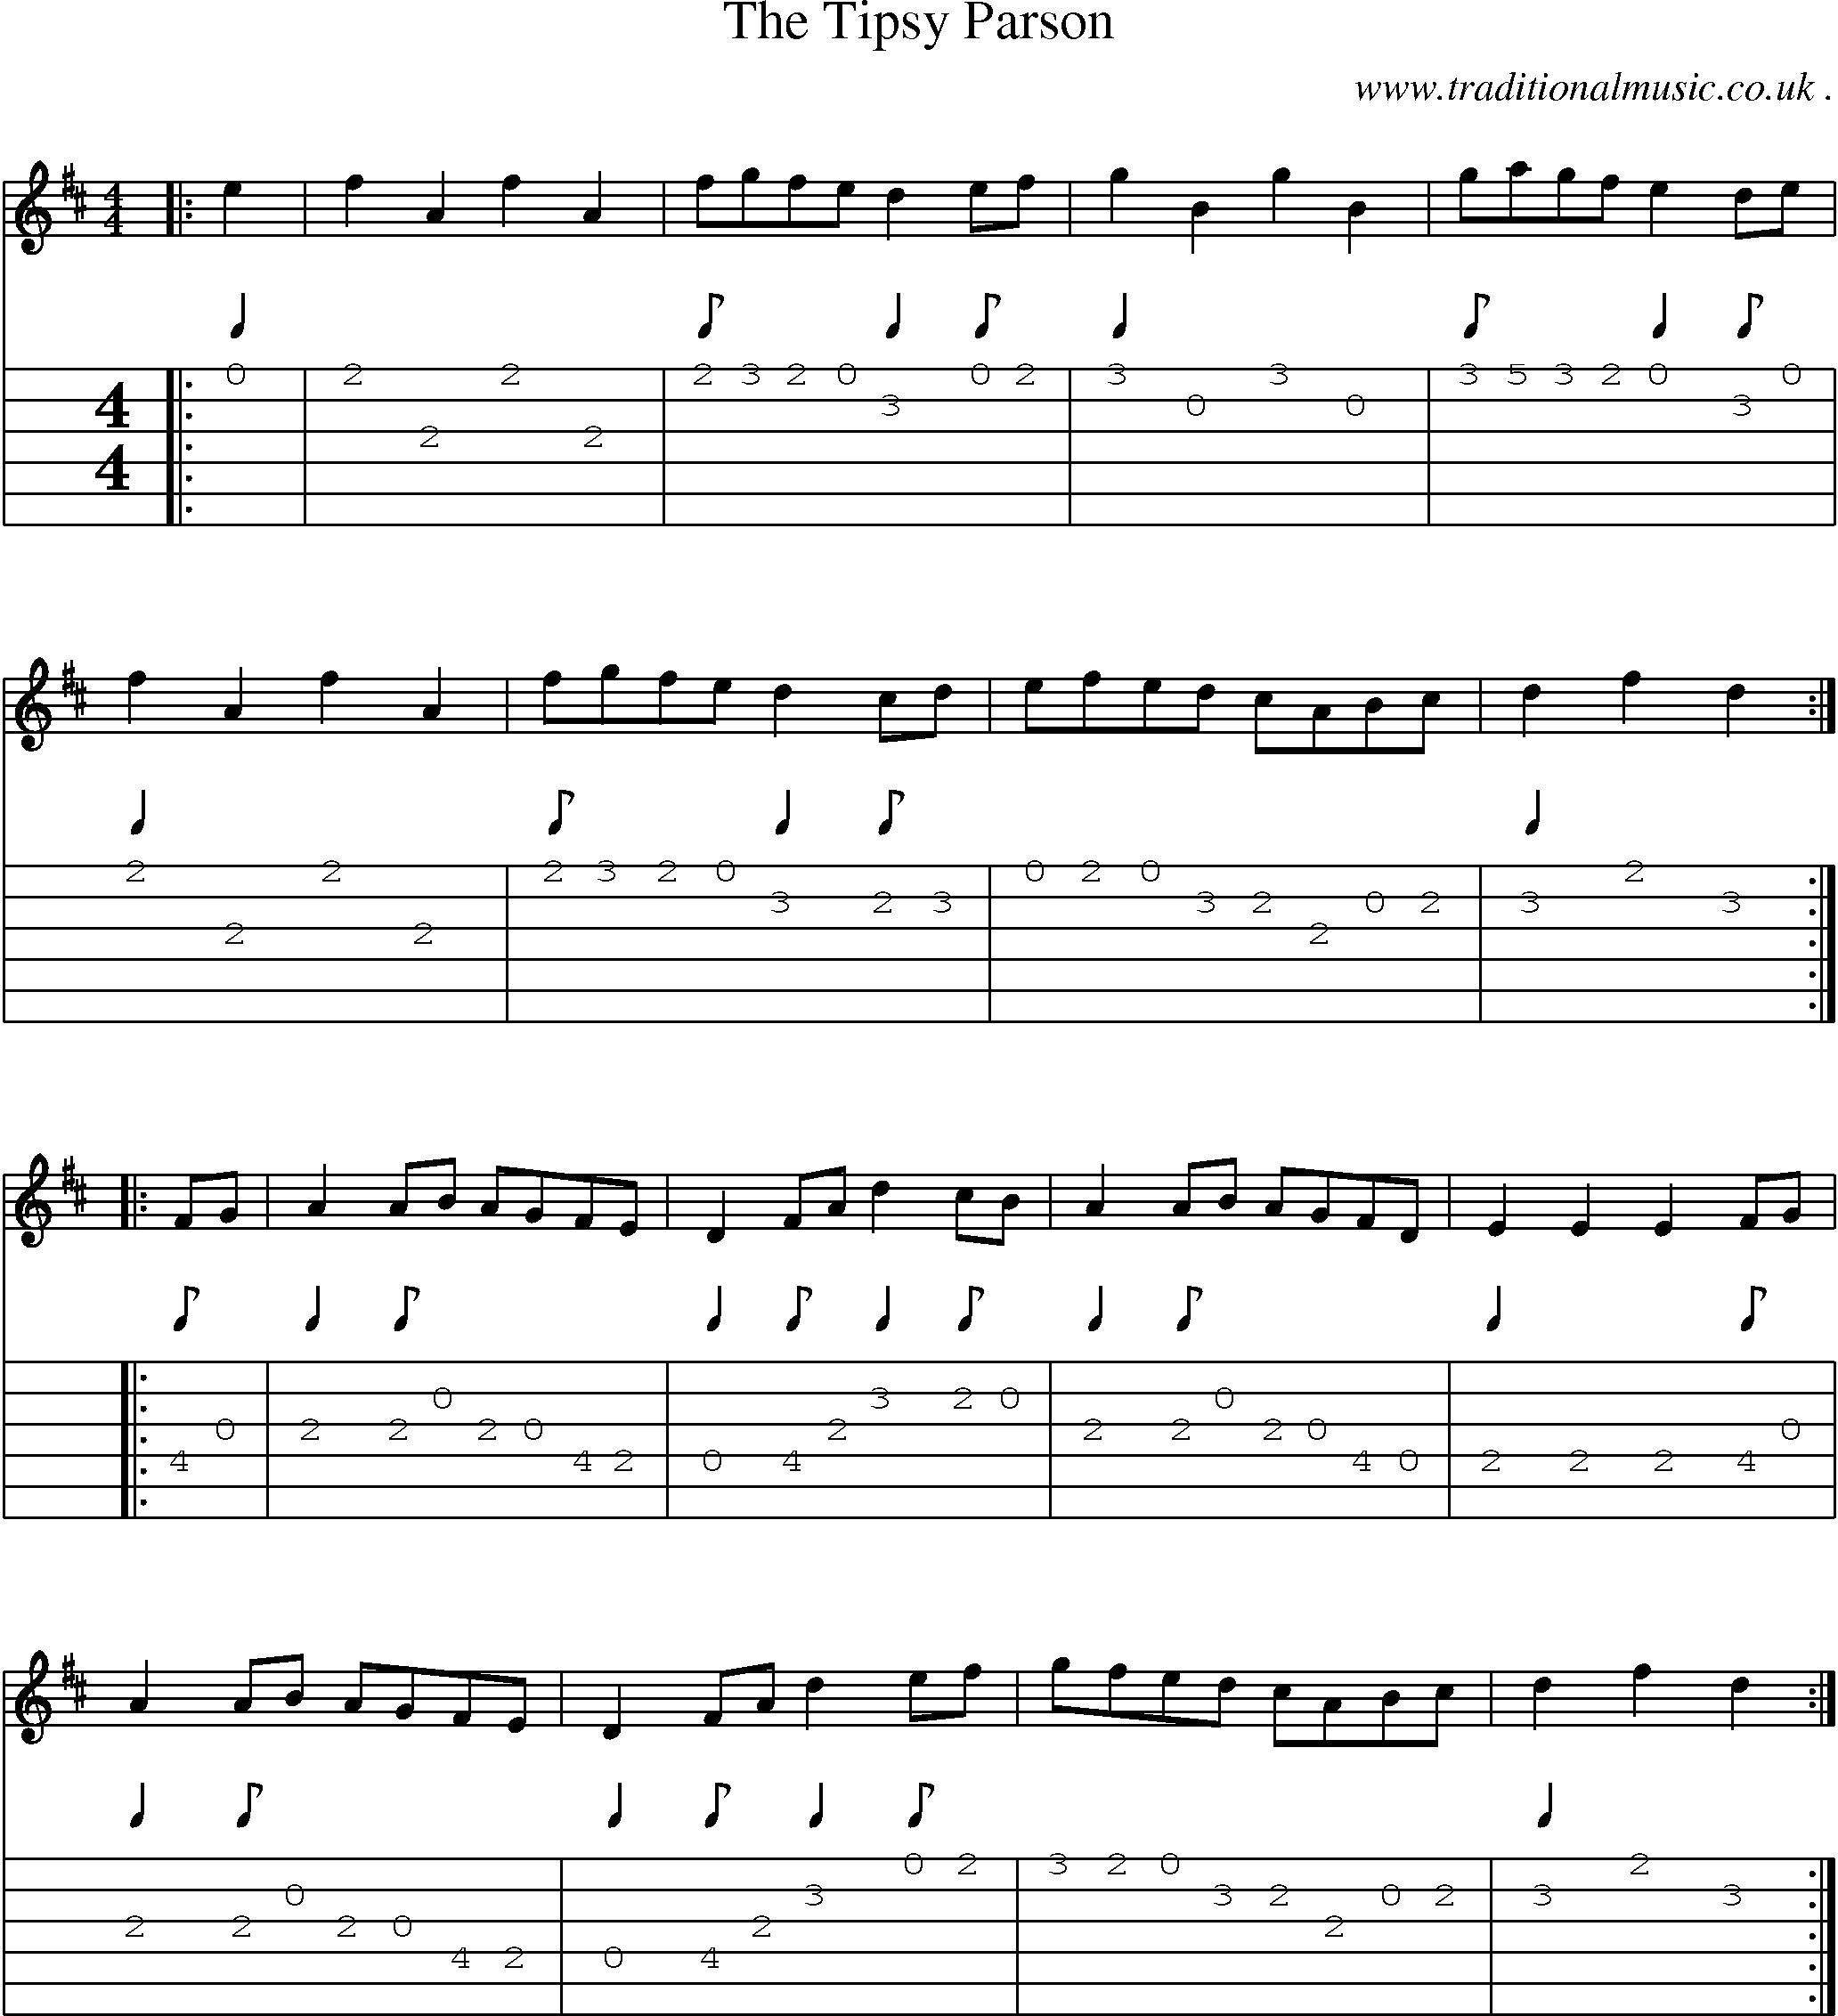 Music Score and Guitar Tabs for The Tipsy Parson